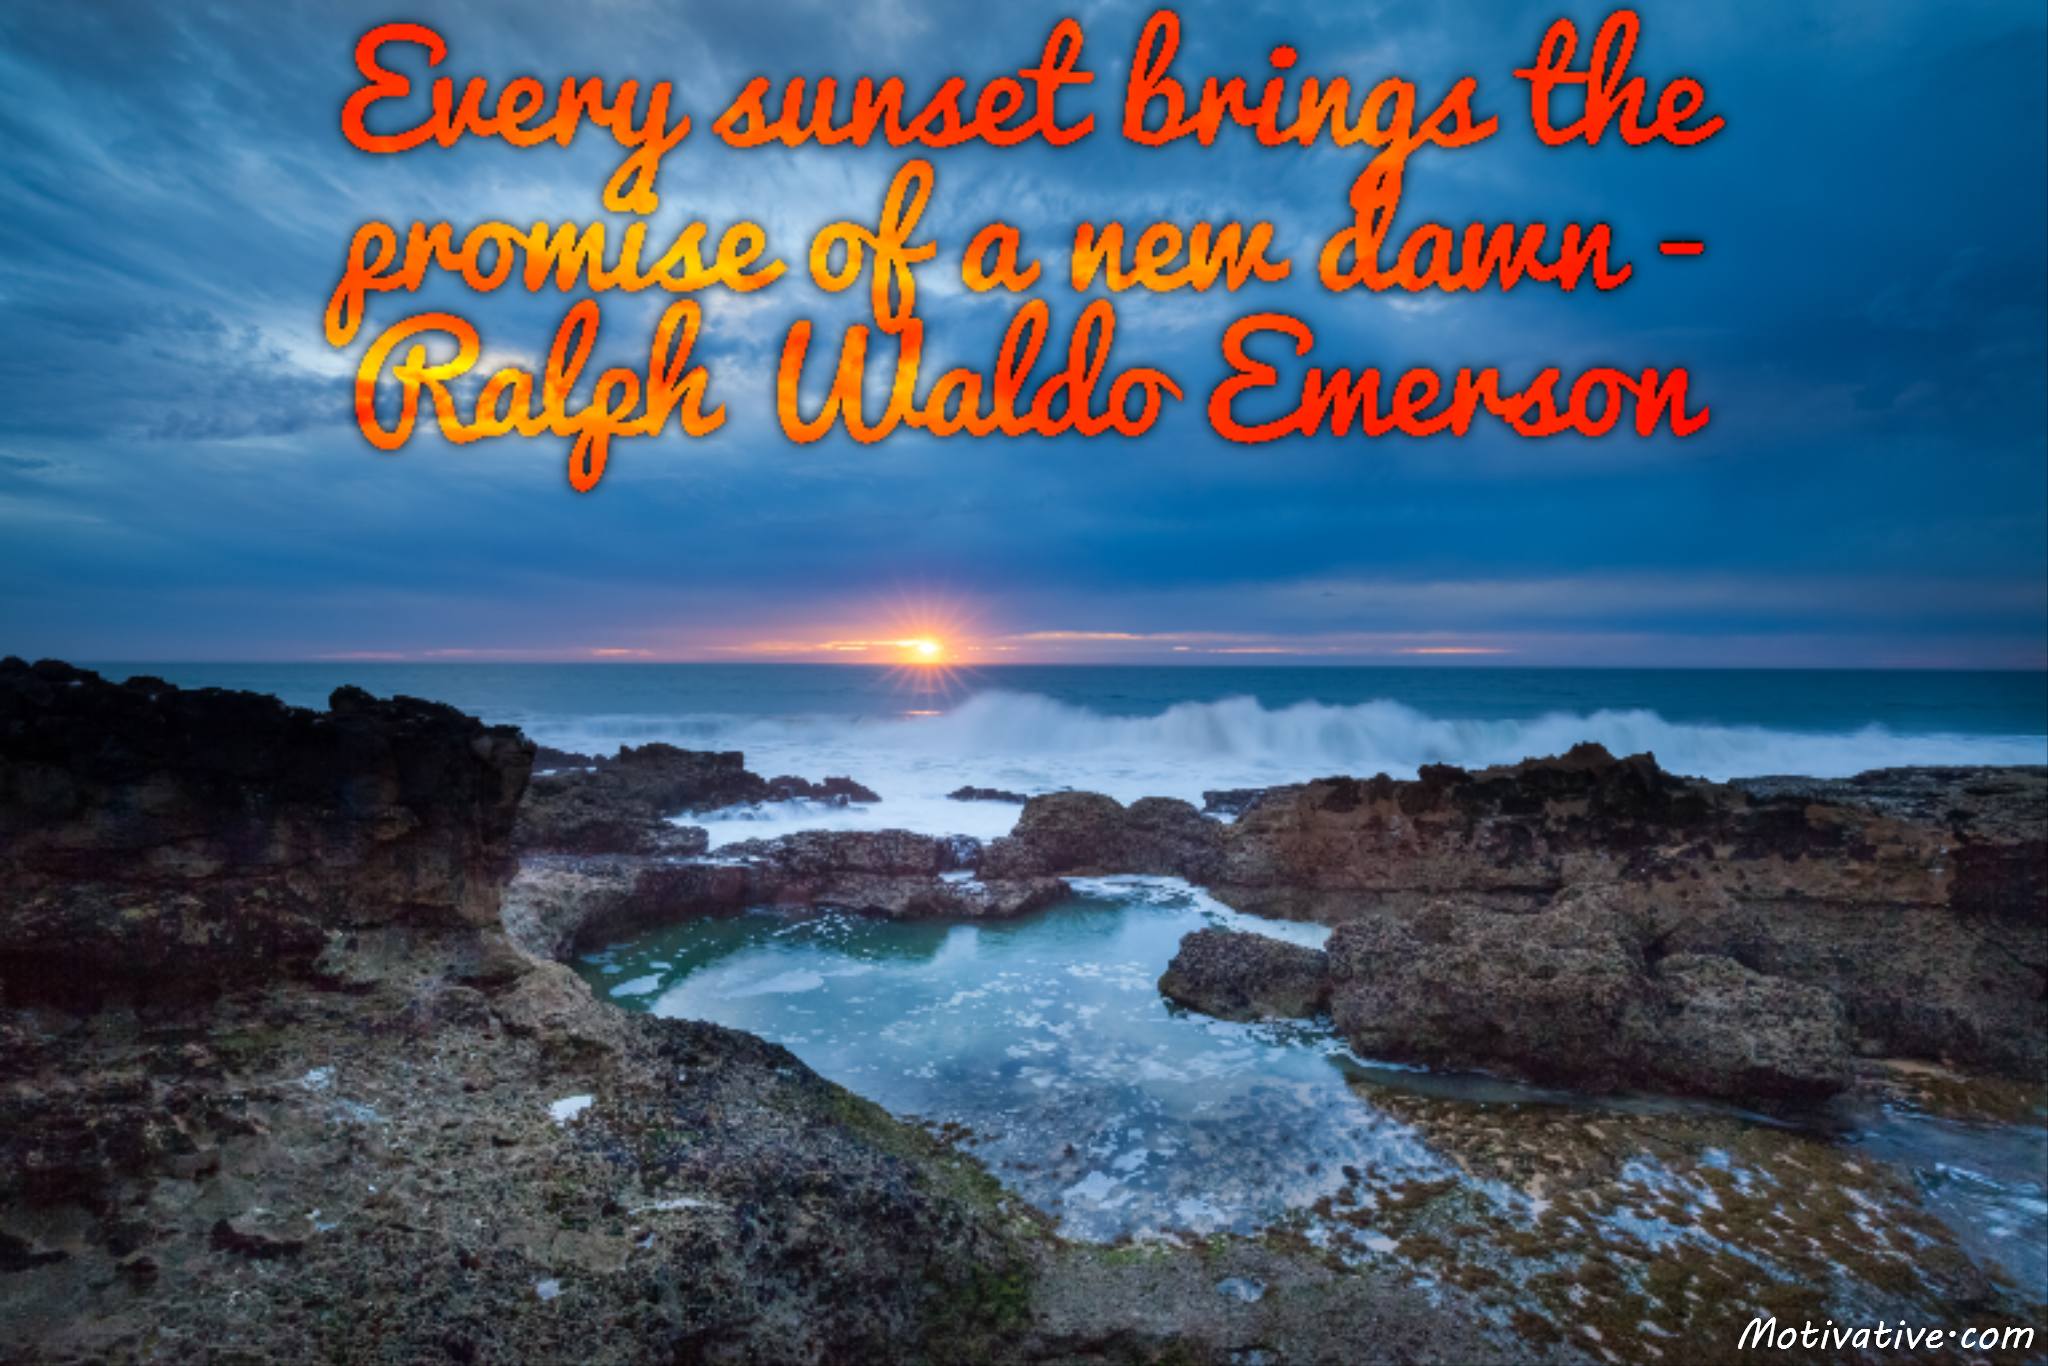 Every sunset brings the promise of a new dawn – Ralph Waldo Emerson